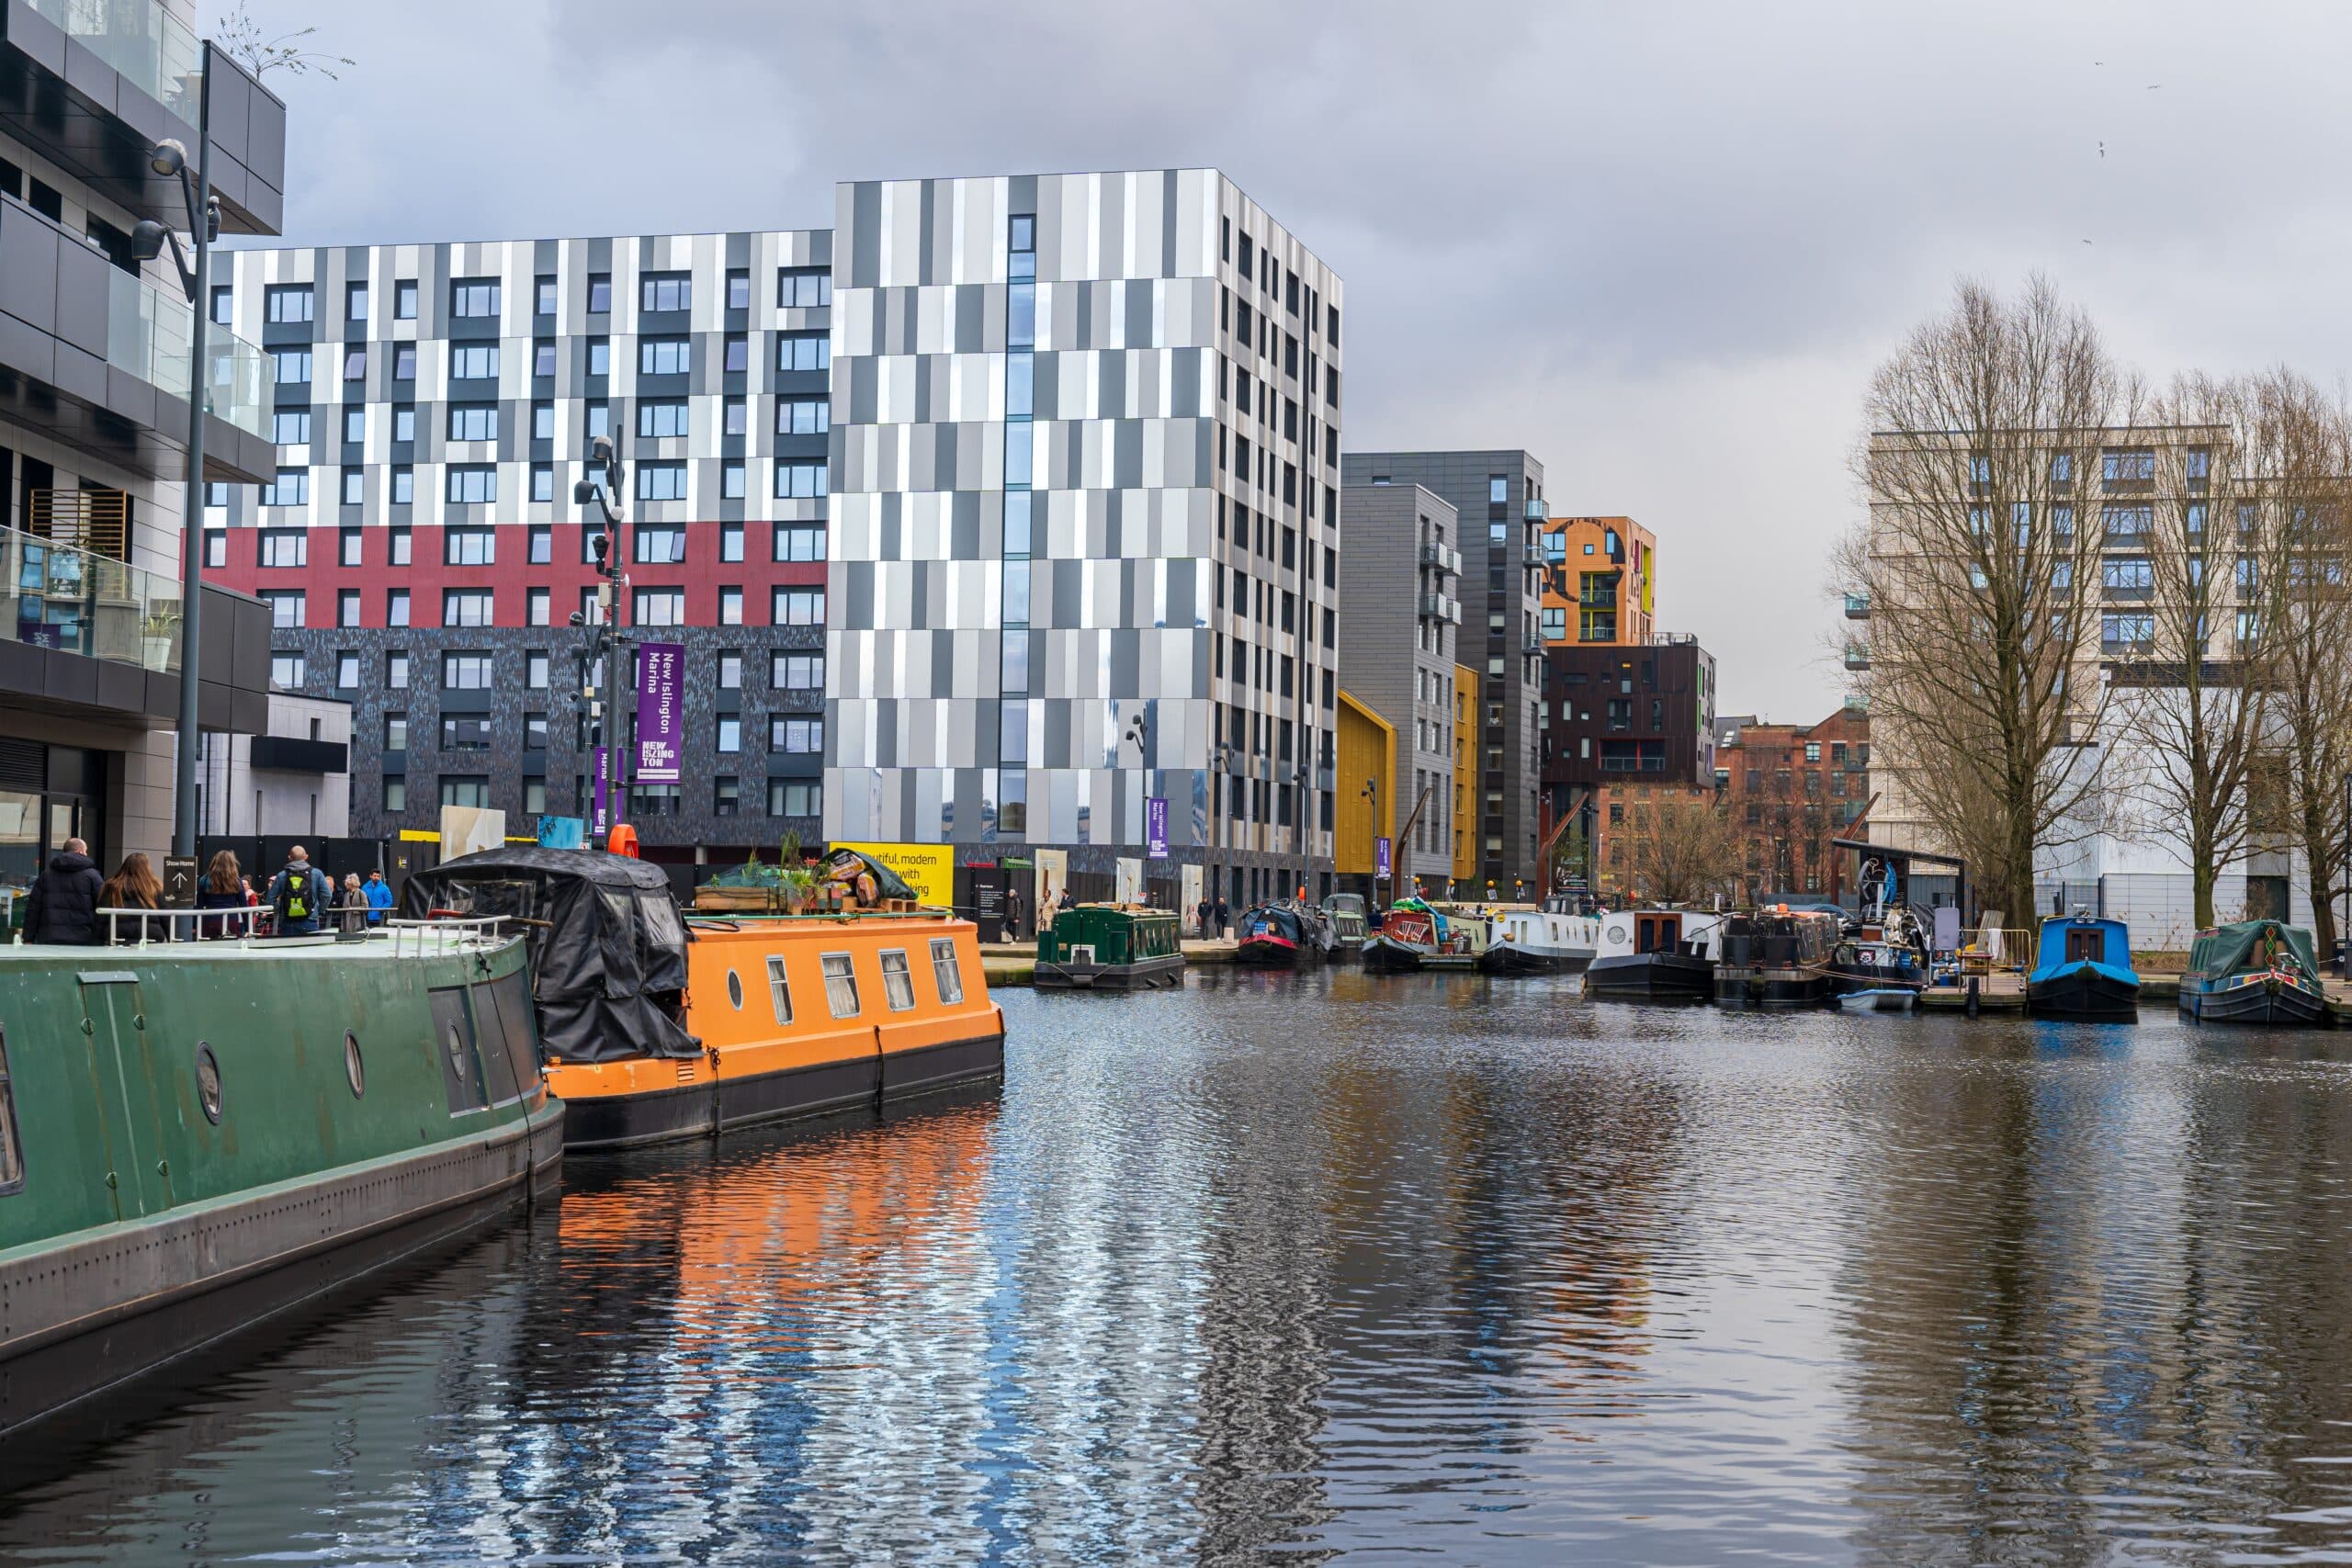 Will Manchester Experience House Price Growth in 2023?